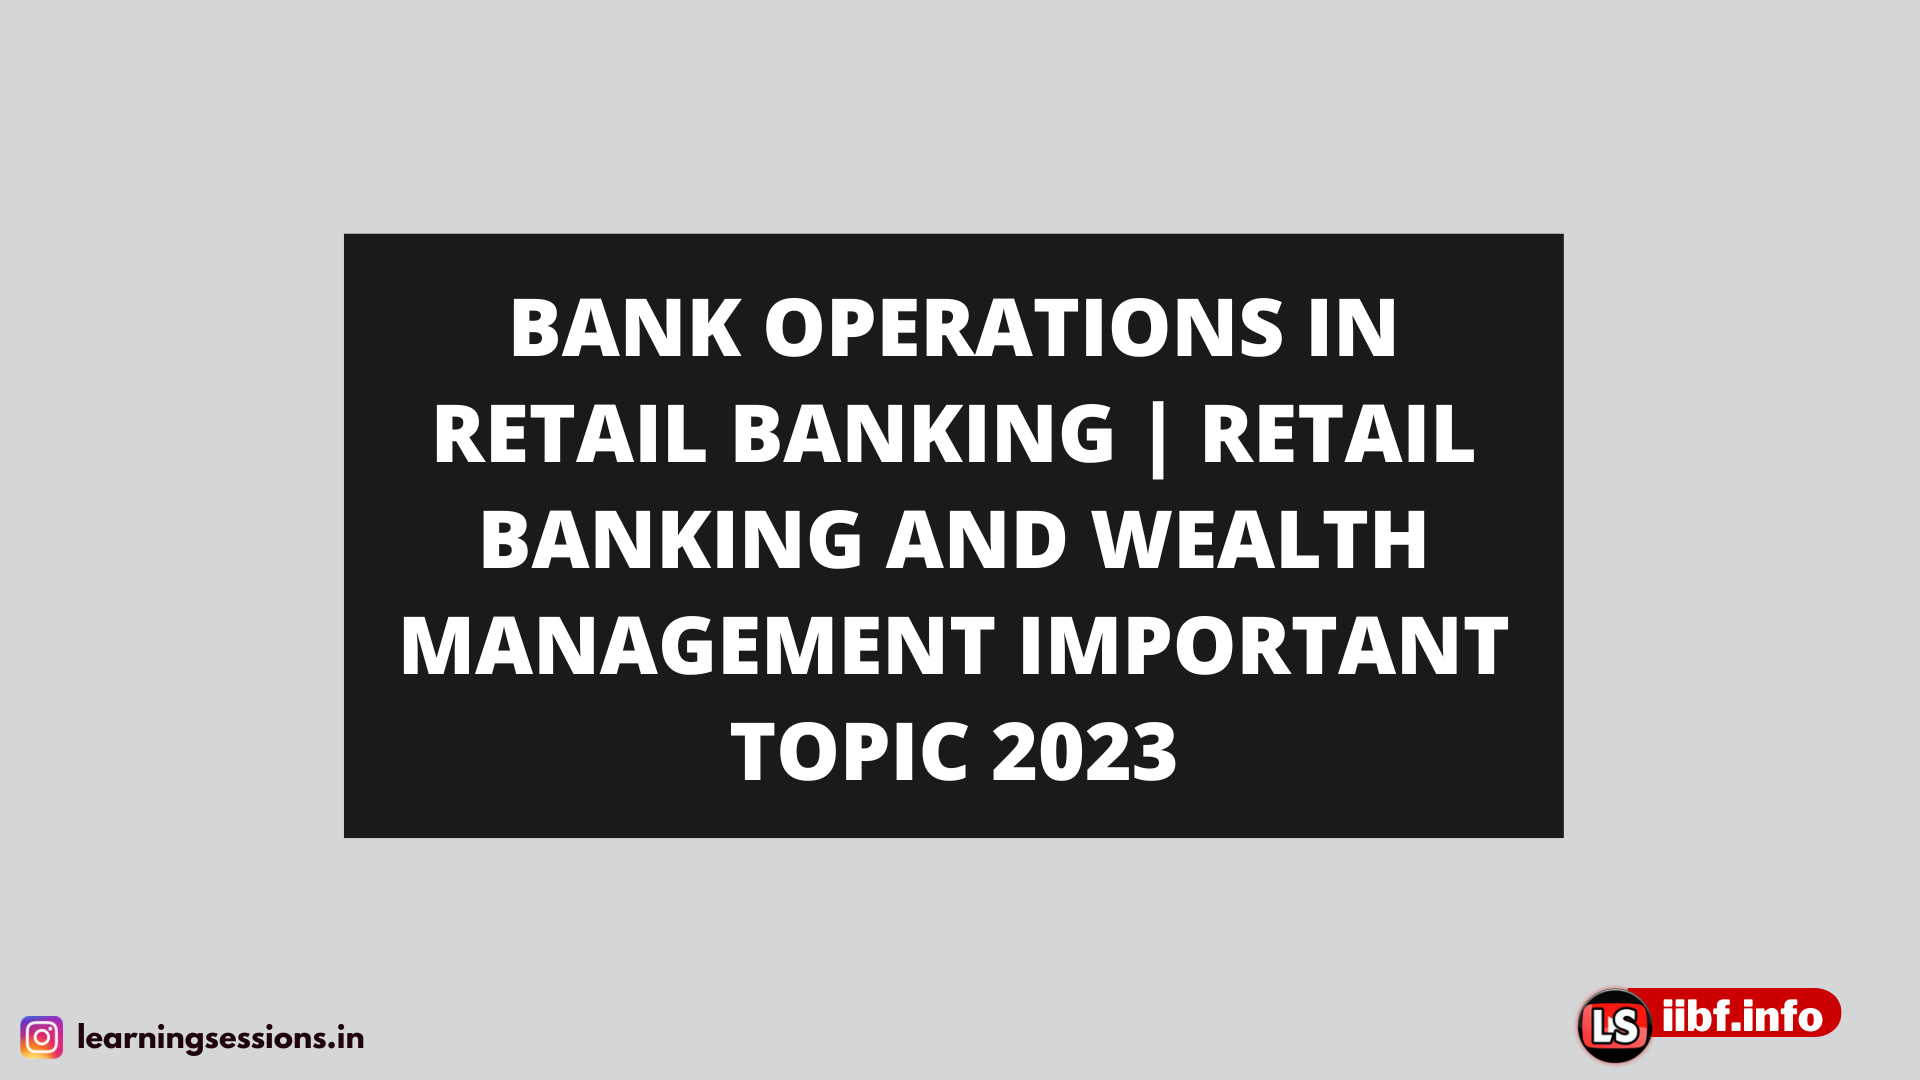 BANK OPERATIONS IN RETAIL BANKING | RETAIL BANKING AND WEALTH MANAGEMENT IMPORTANT TOPIC 2023